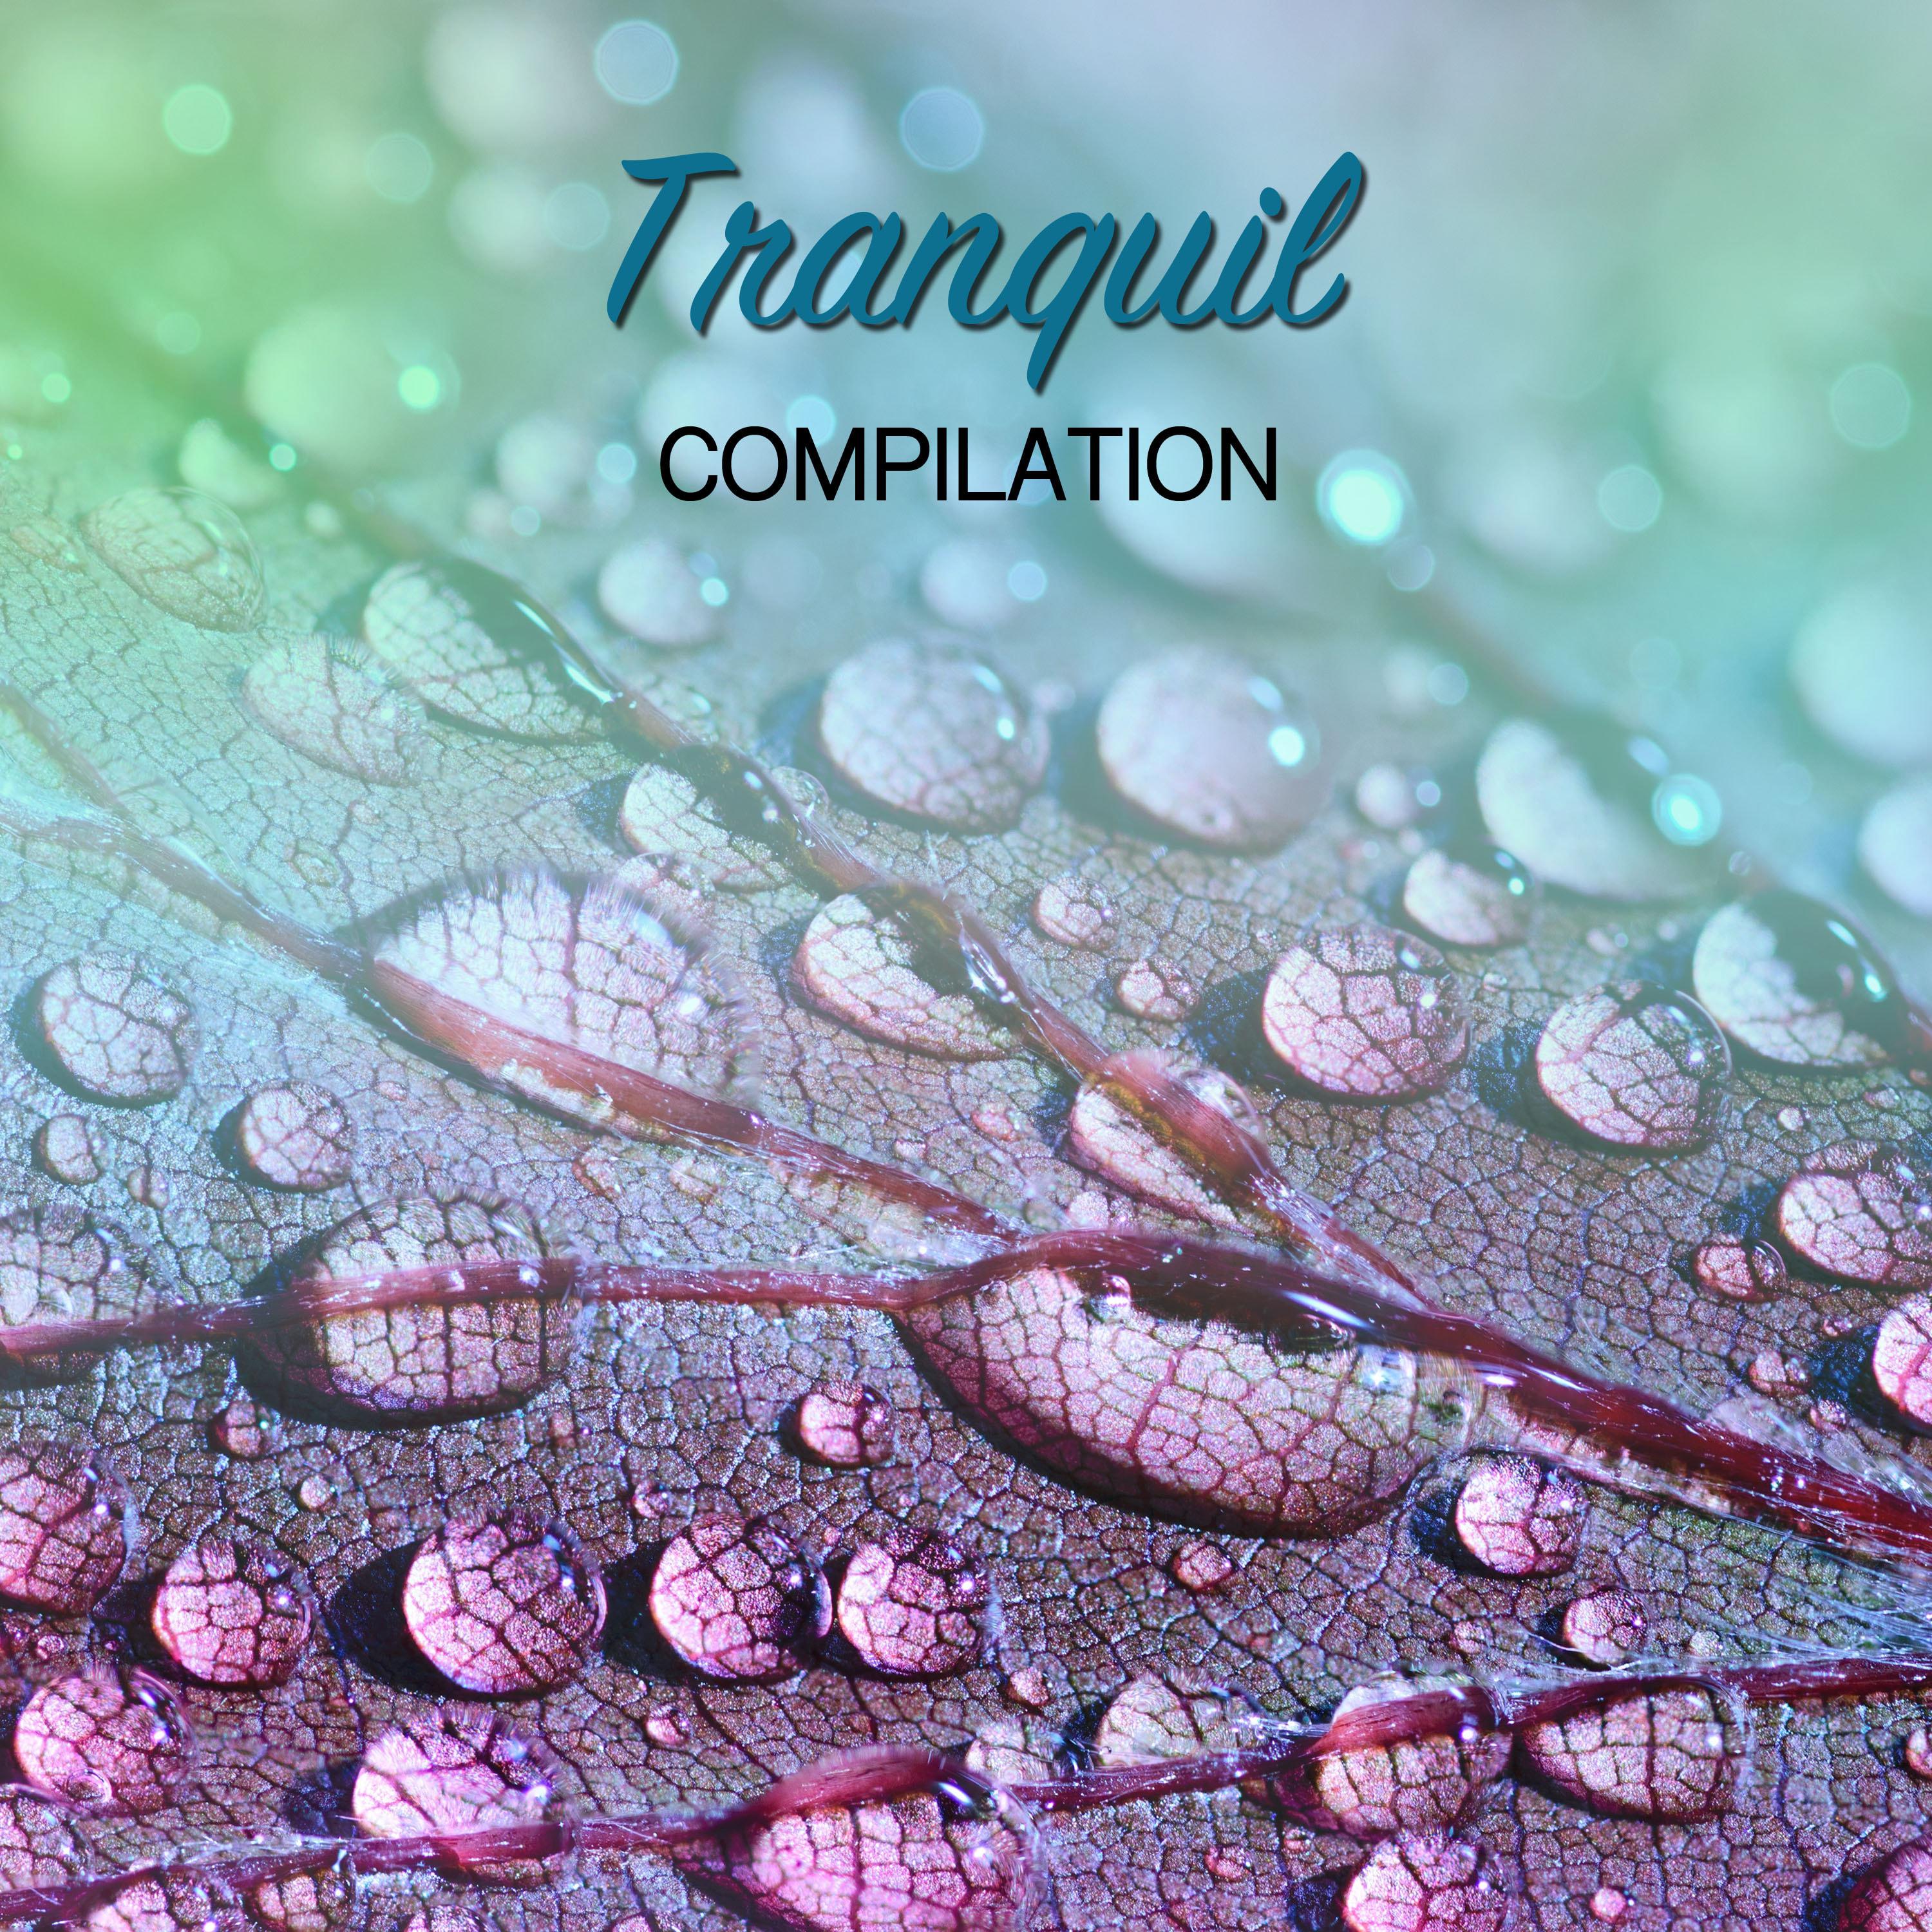 #16 Tranquil Compilation for Asian Spa, Meditation & Yoga